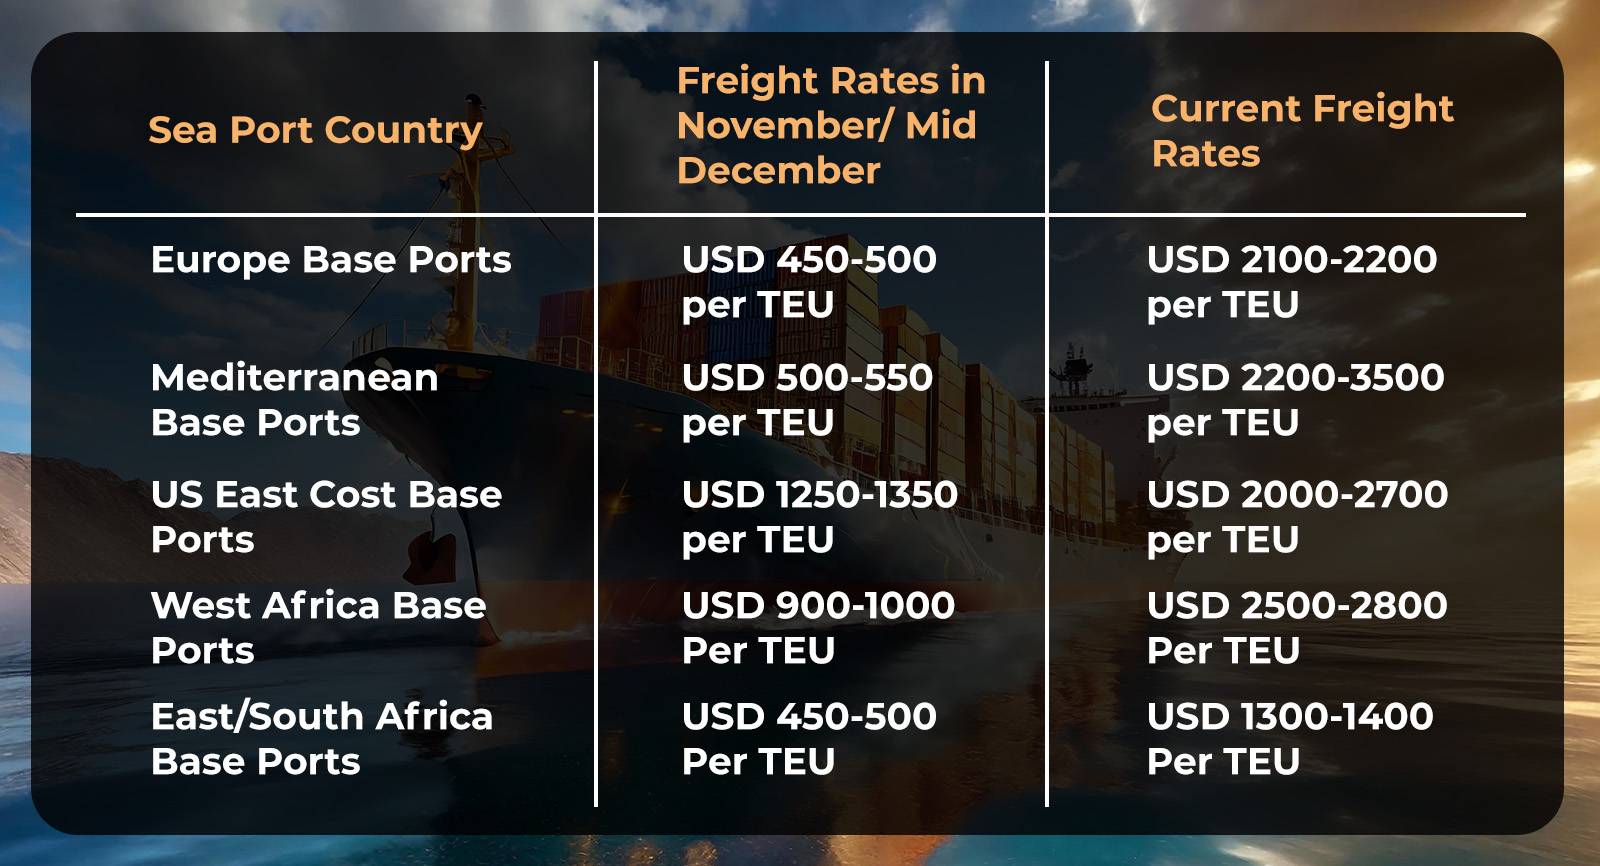 Old and New Freight Rates for Red Sea